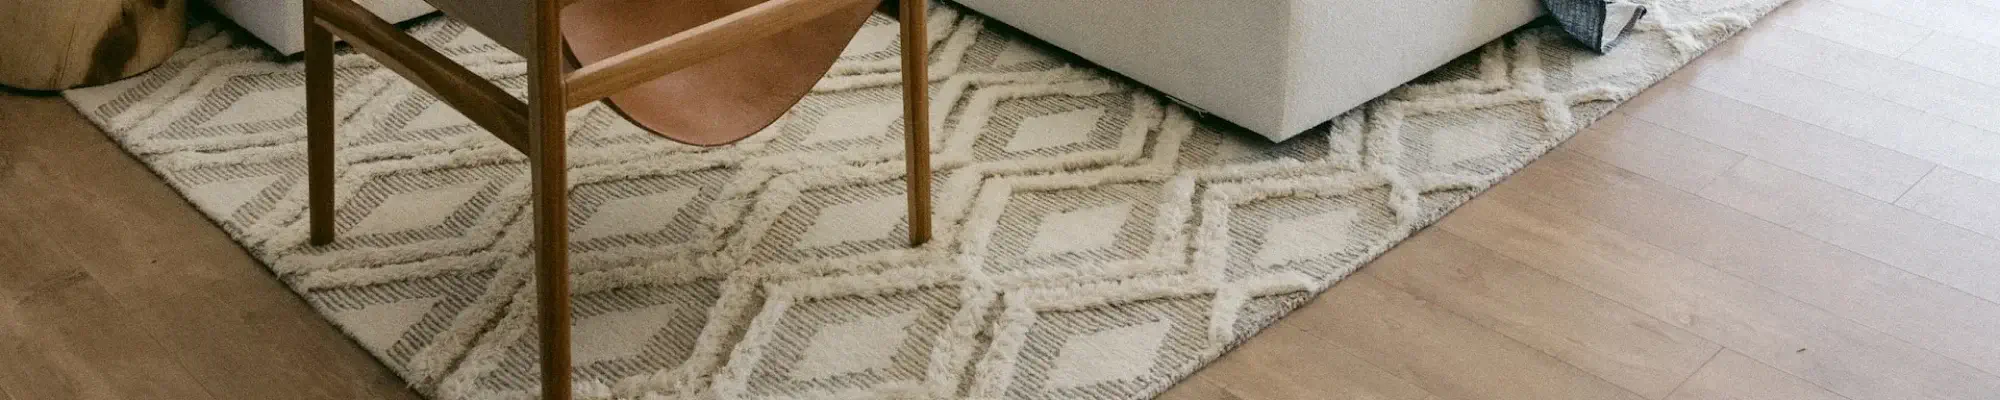 Get the area rug information & inspiration you need to feel confident in your next flooring upgrade.